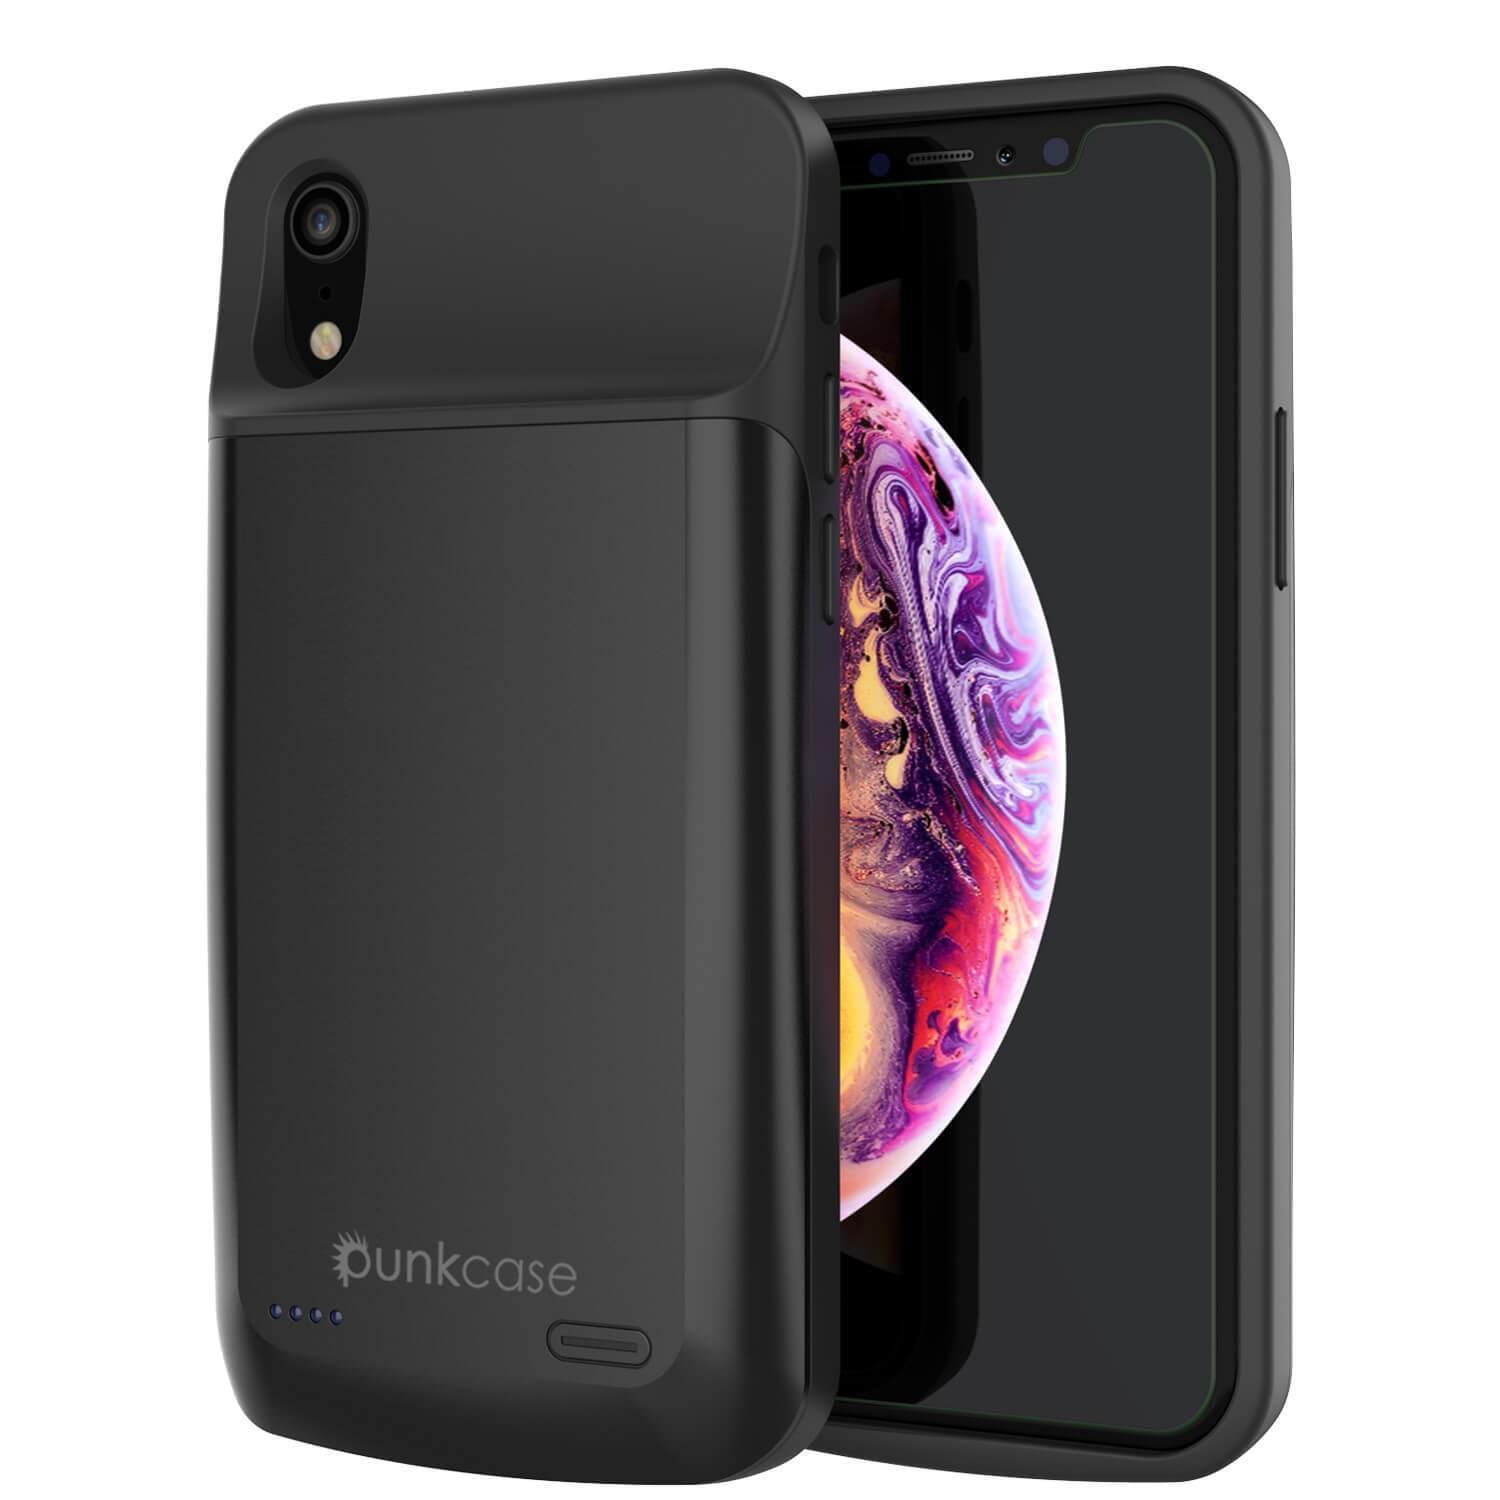 iPhone 11 Pro Battery Case, PunkJuice 5000mAH Fast Charging Power Bank W/ Screen Protector | [Black]